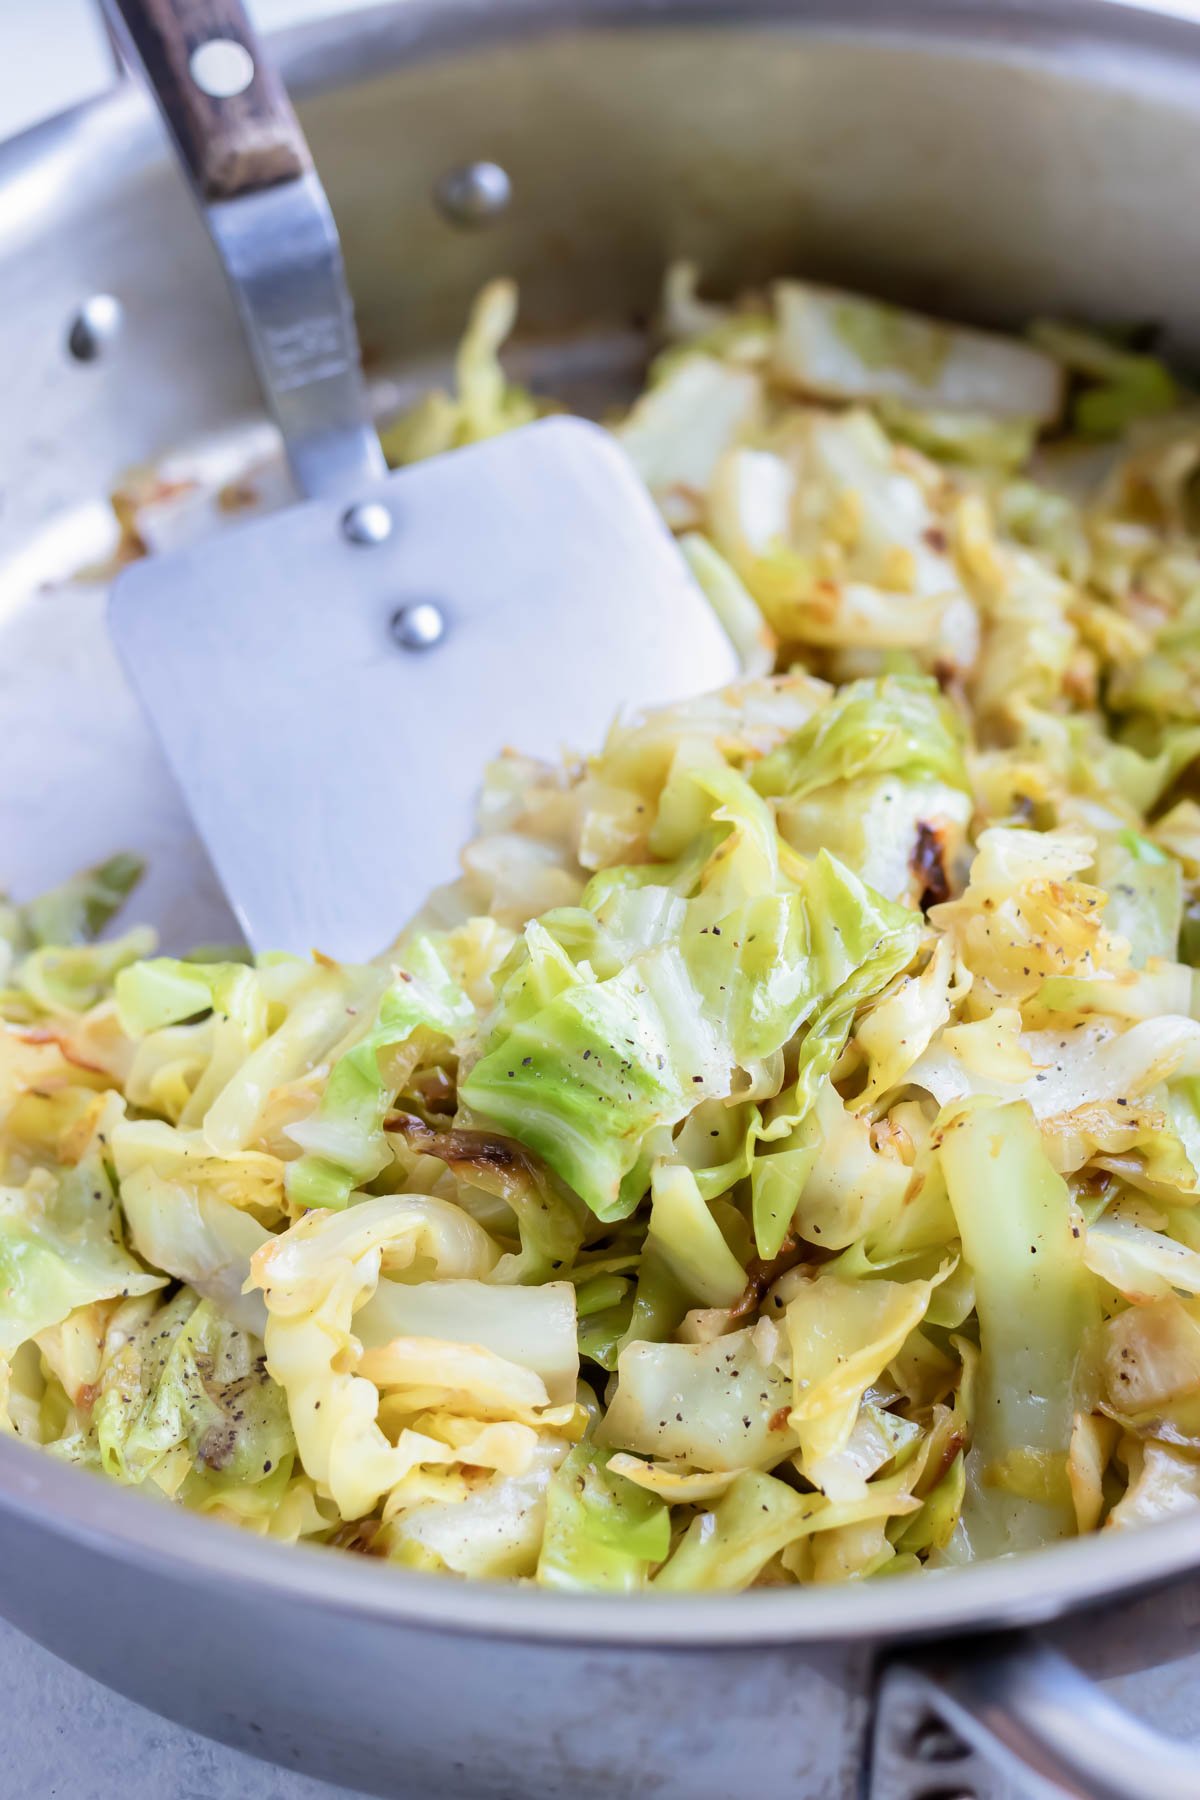 Simple Sautéed Cabbage with Onions - Evolving Table